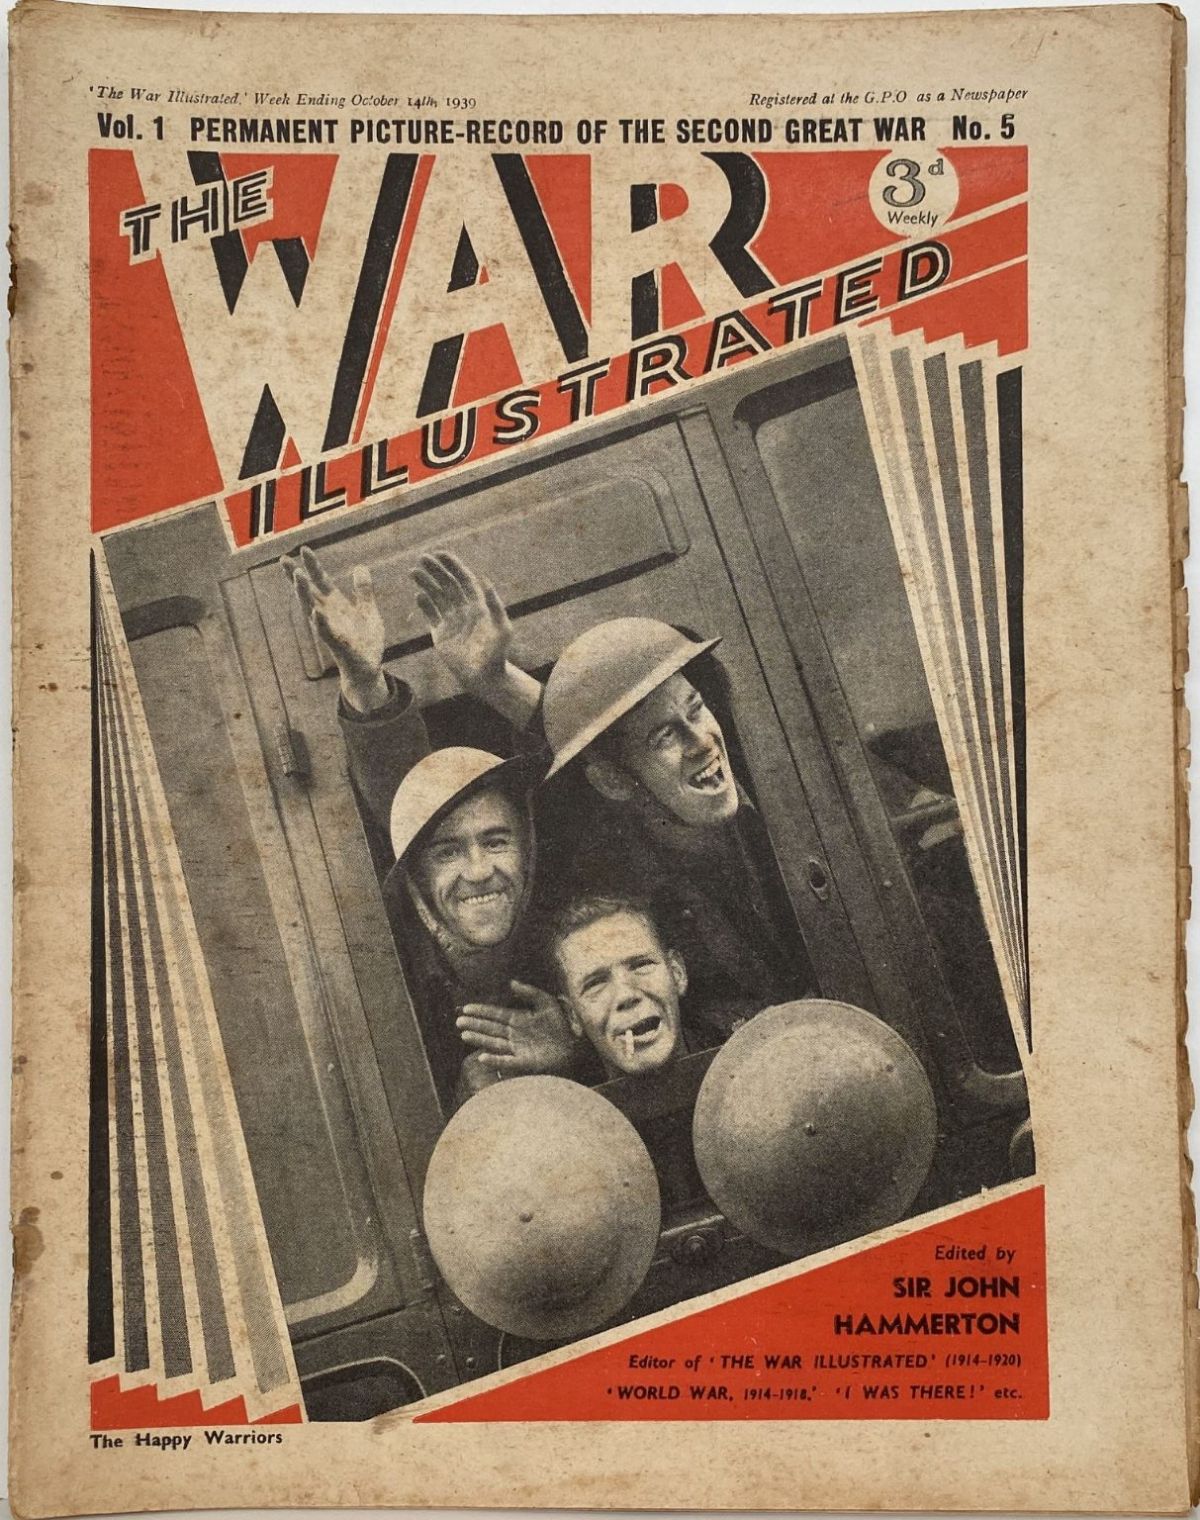 THE WAR ILLUSTRATED - Vol 1, No 5, 14th Oct 1939